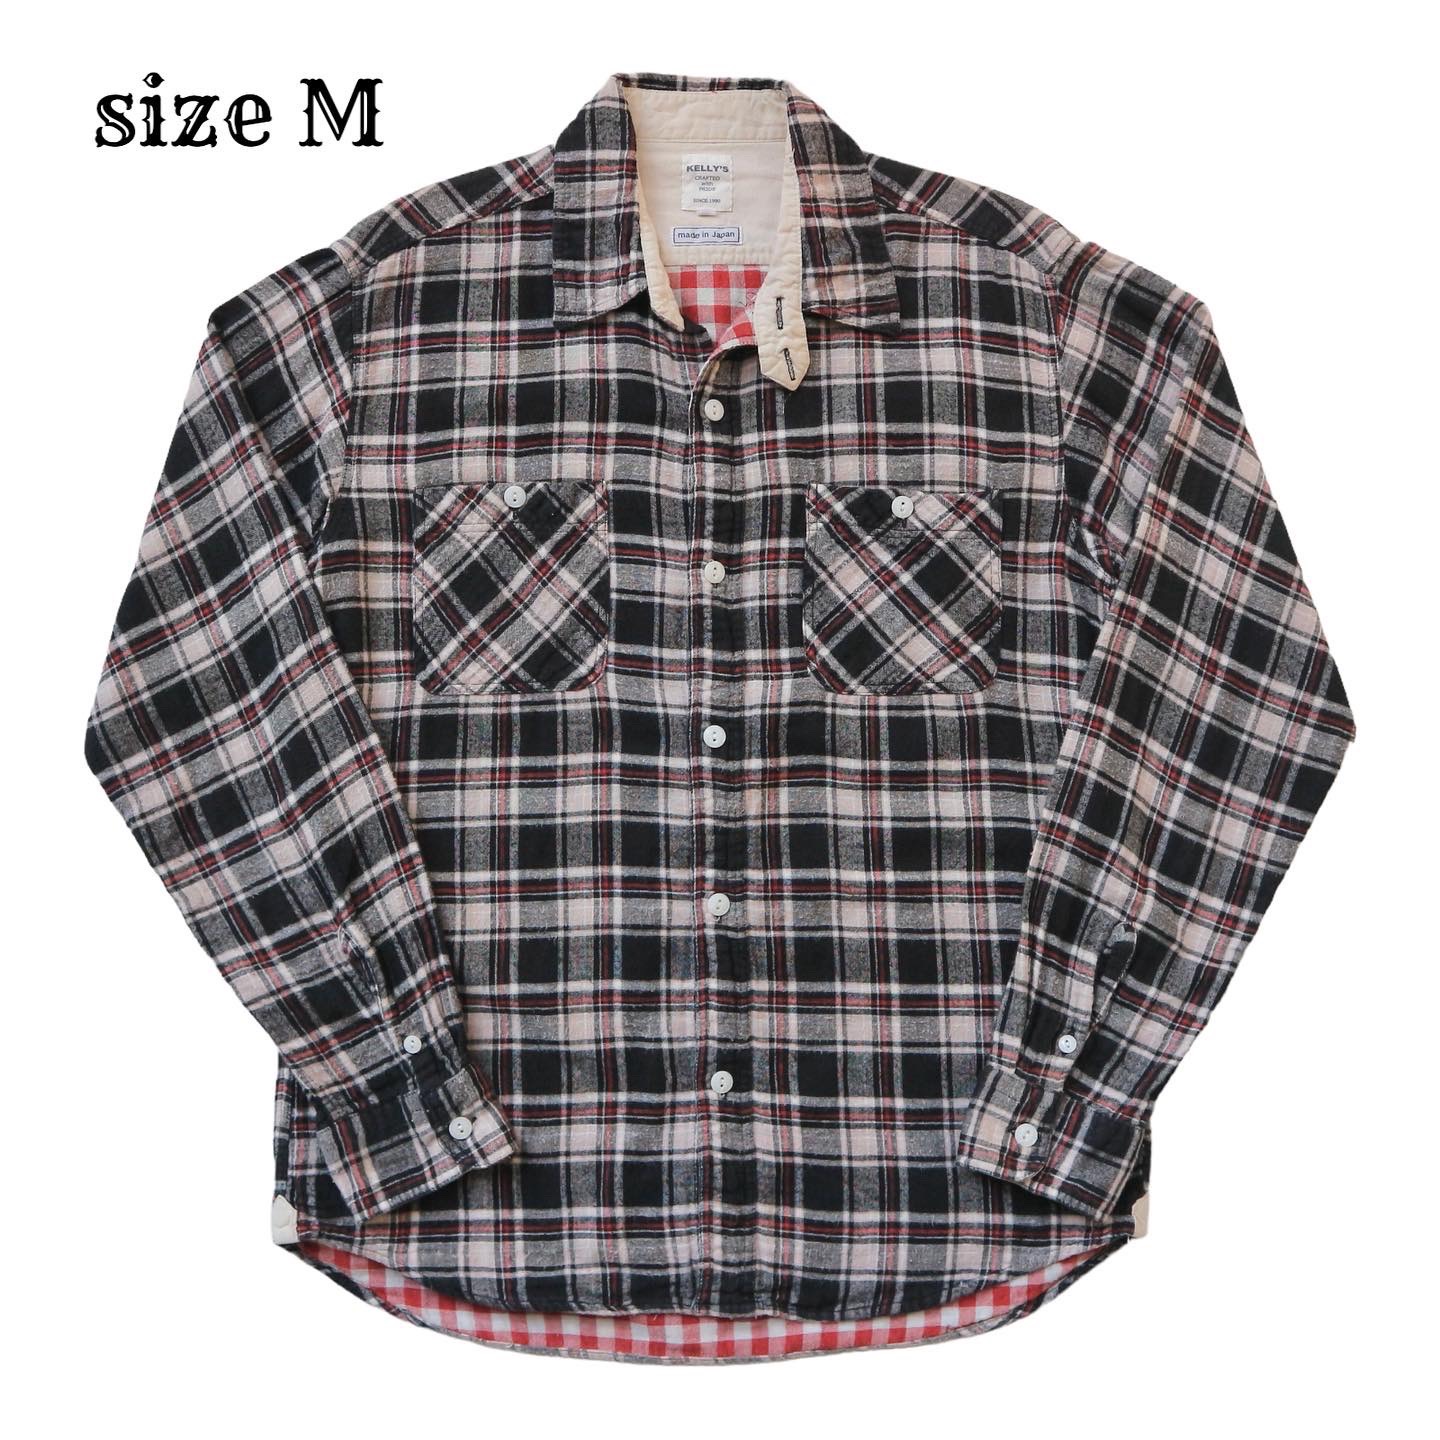 KELLY’S Flannel Work Shirt Size M